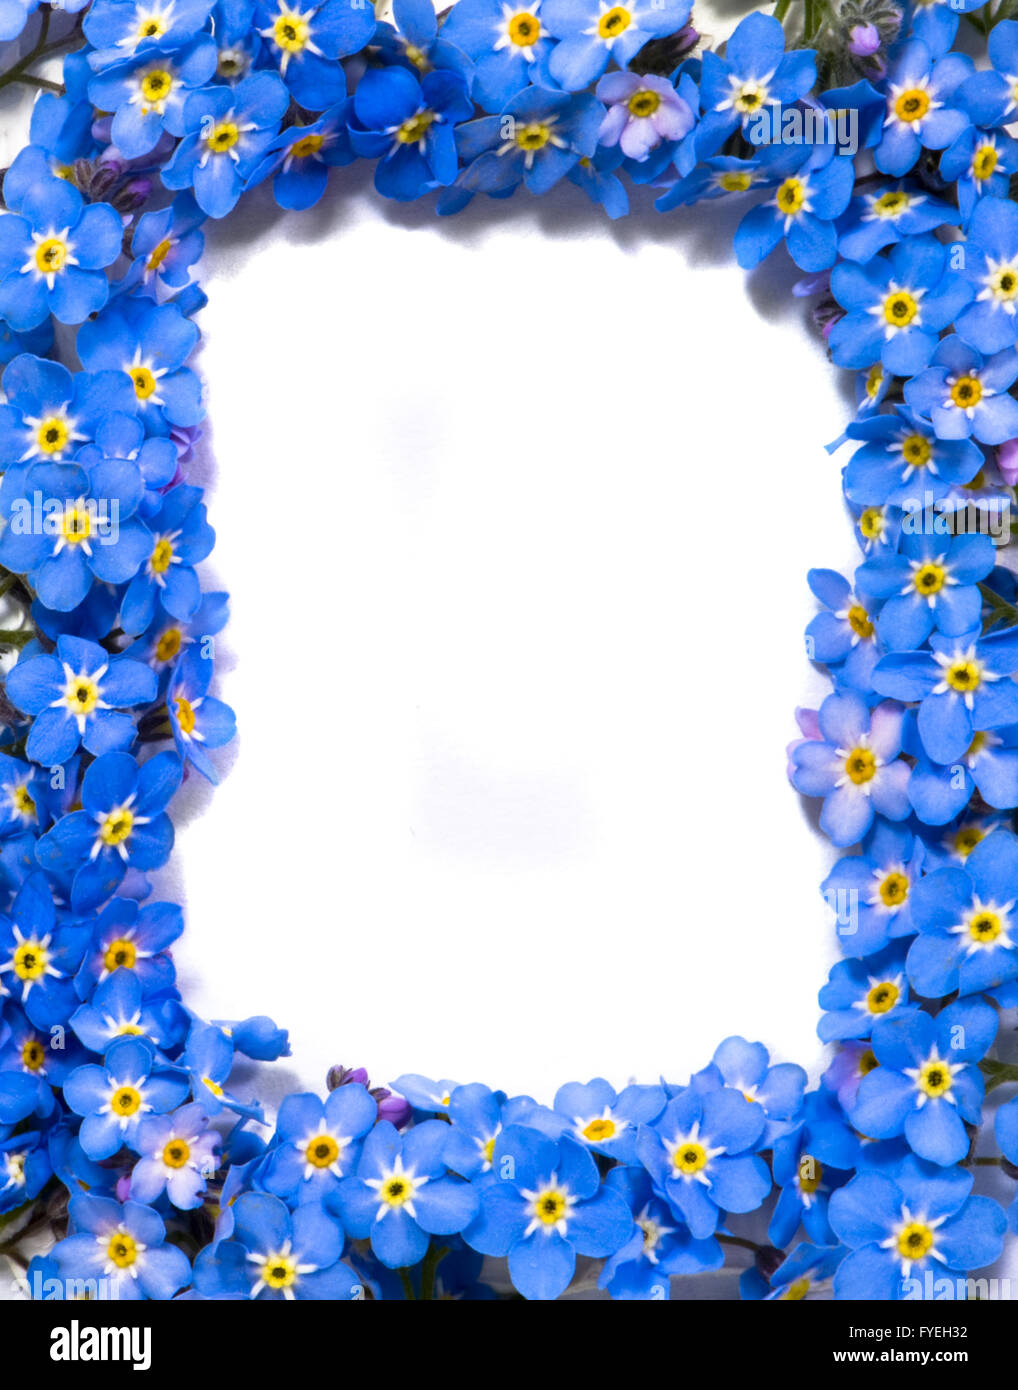 forget-me-not flowers frame Stock Photo